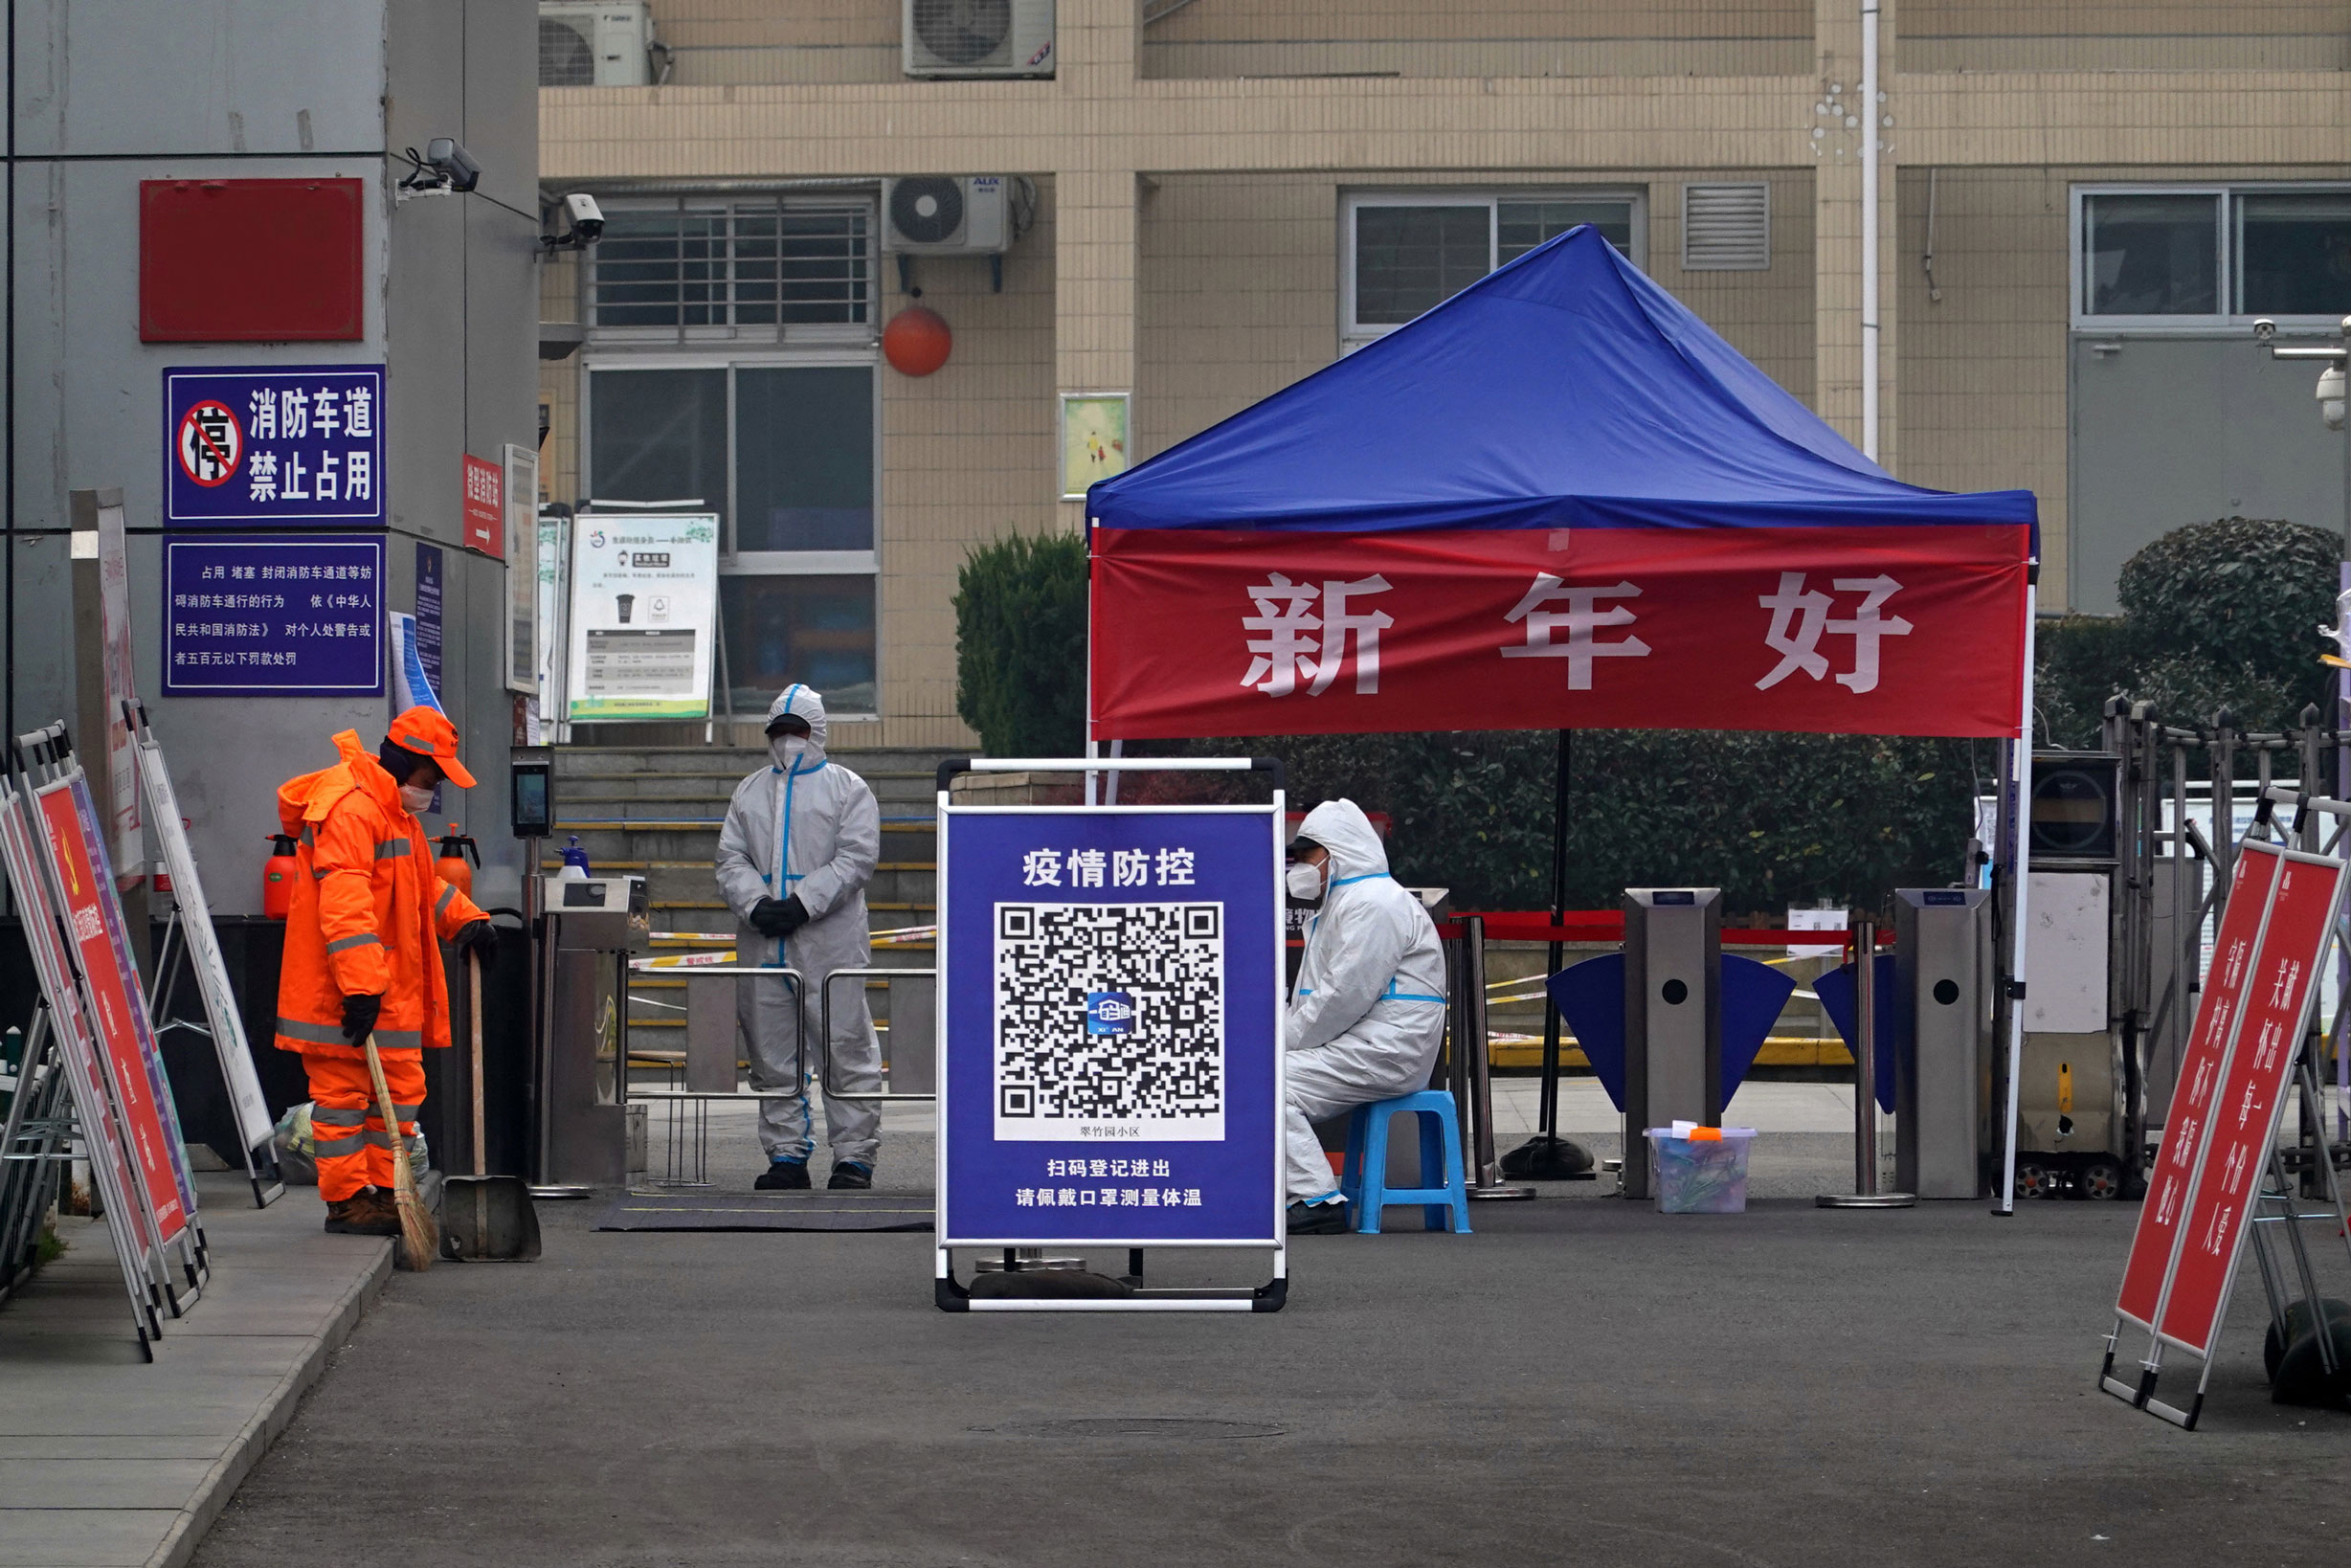 People in protective suits stand guard at an entrance of a residential compound in Xi'an on January 5.